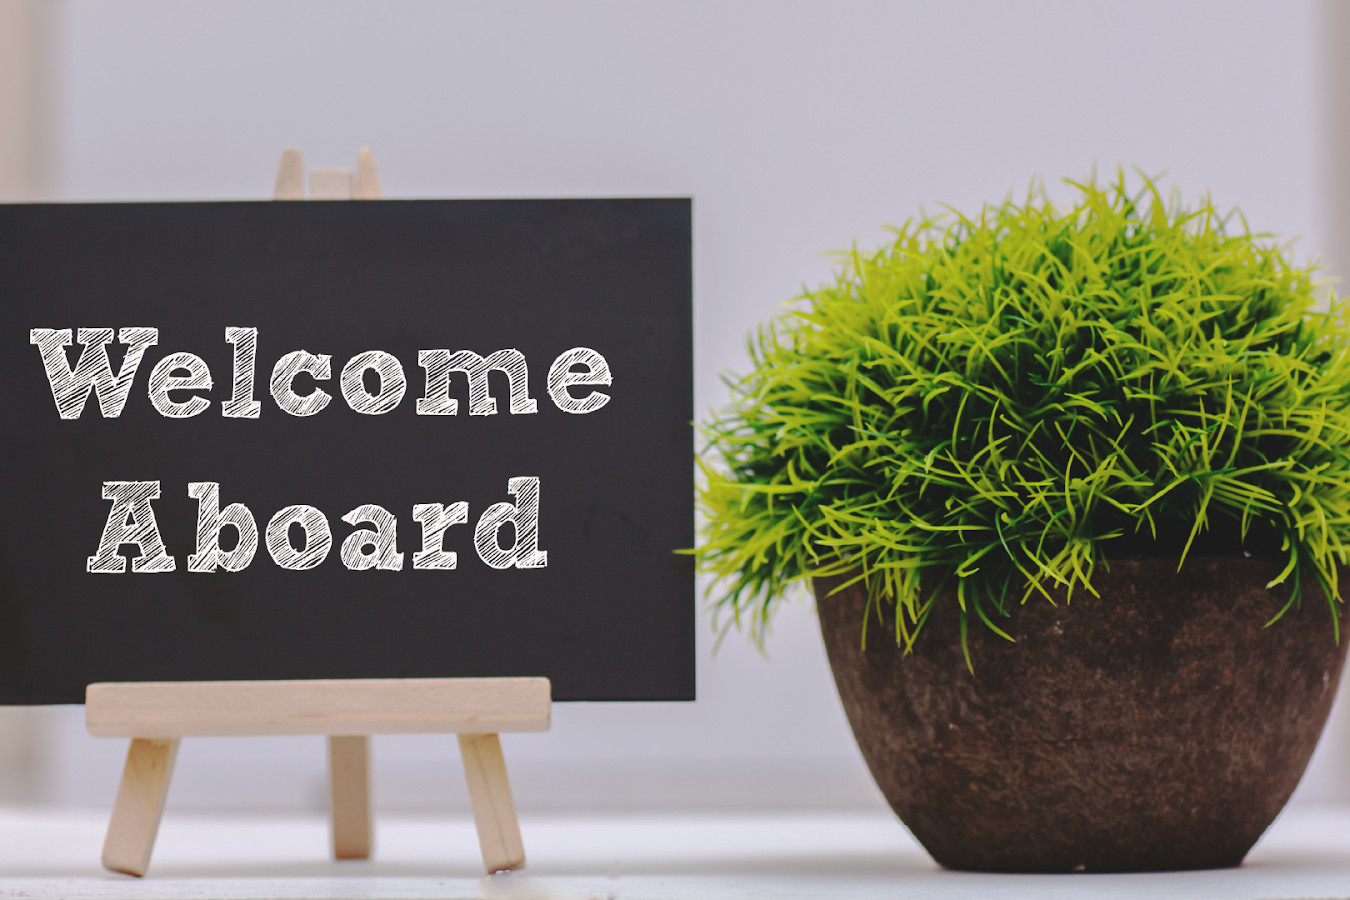 Agency employees onboarding best practices